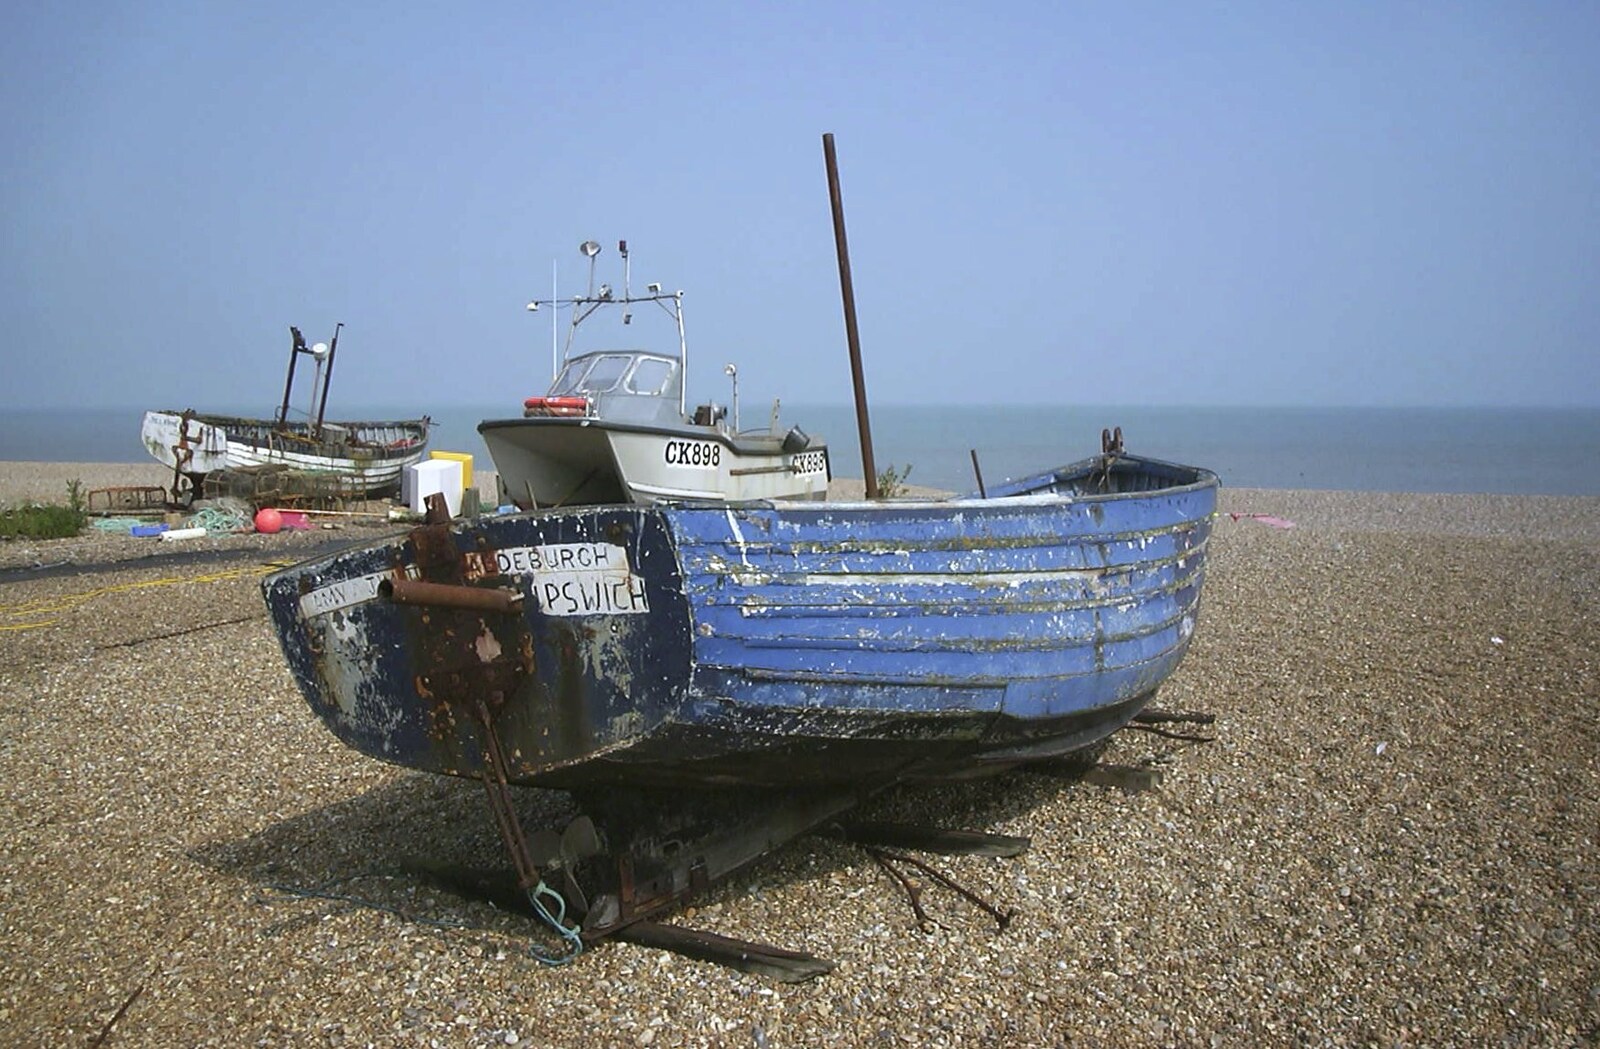 A gently-decaying fishing boat on Aldeburgh beach from Mother and Mike Visit Aldeburgh, Suffolk - 8th August 2003